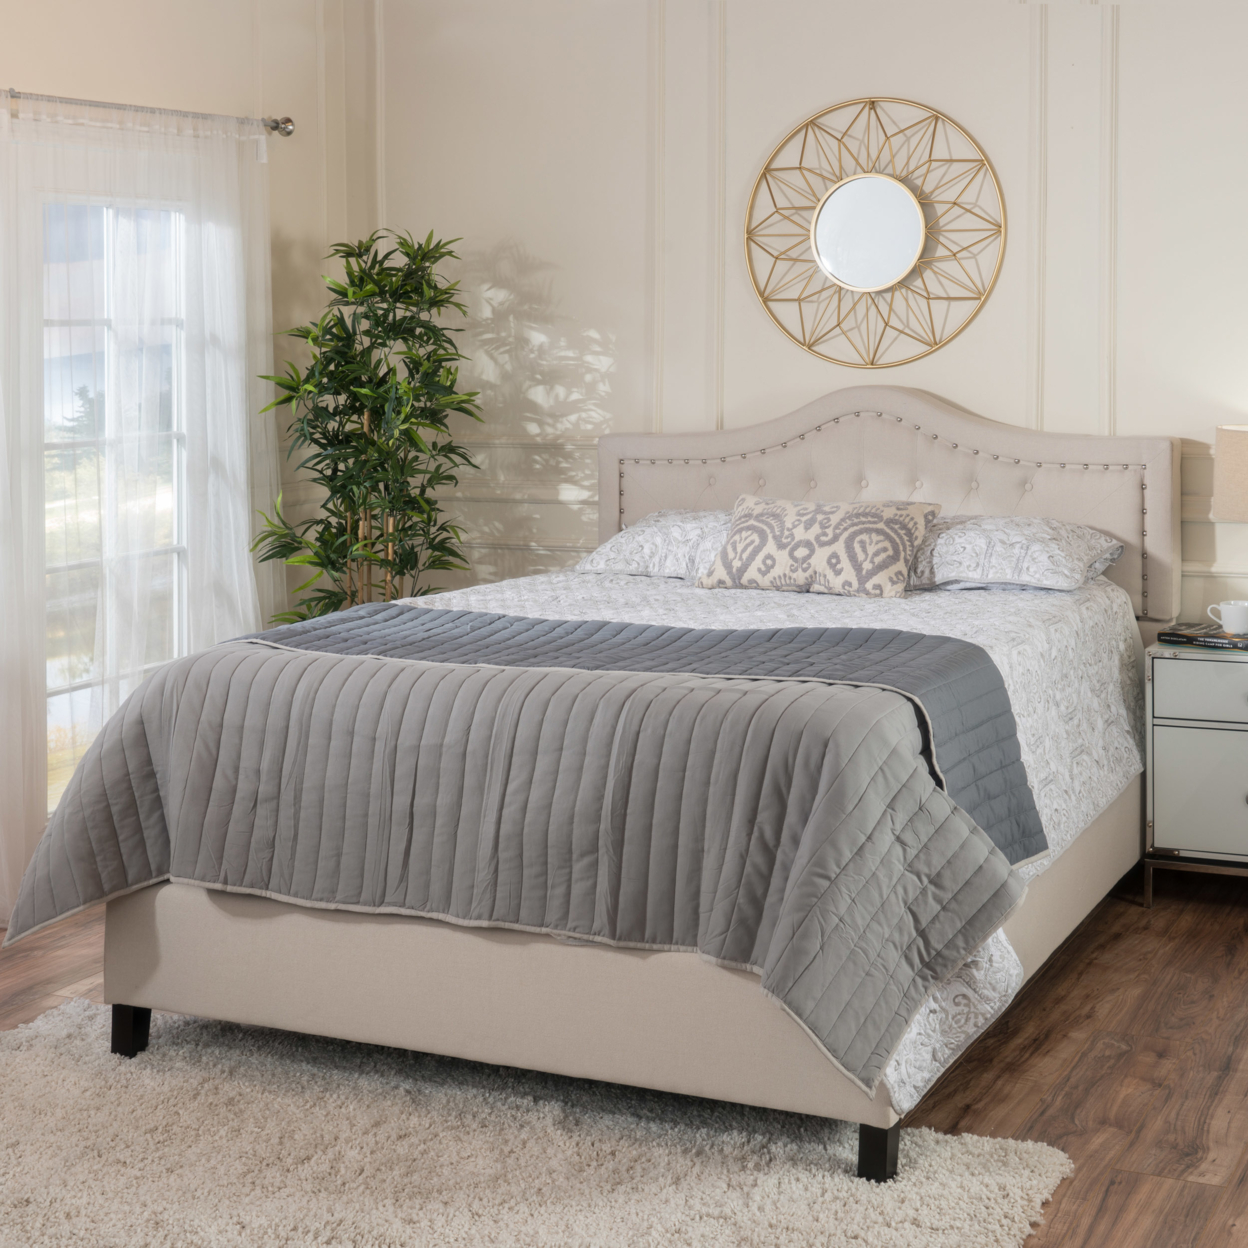 Adelais Fully Upholstered Queen Bed Set - Ivory